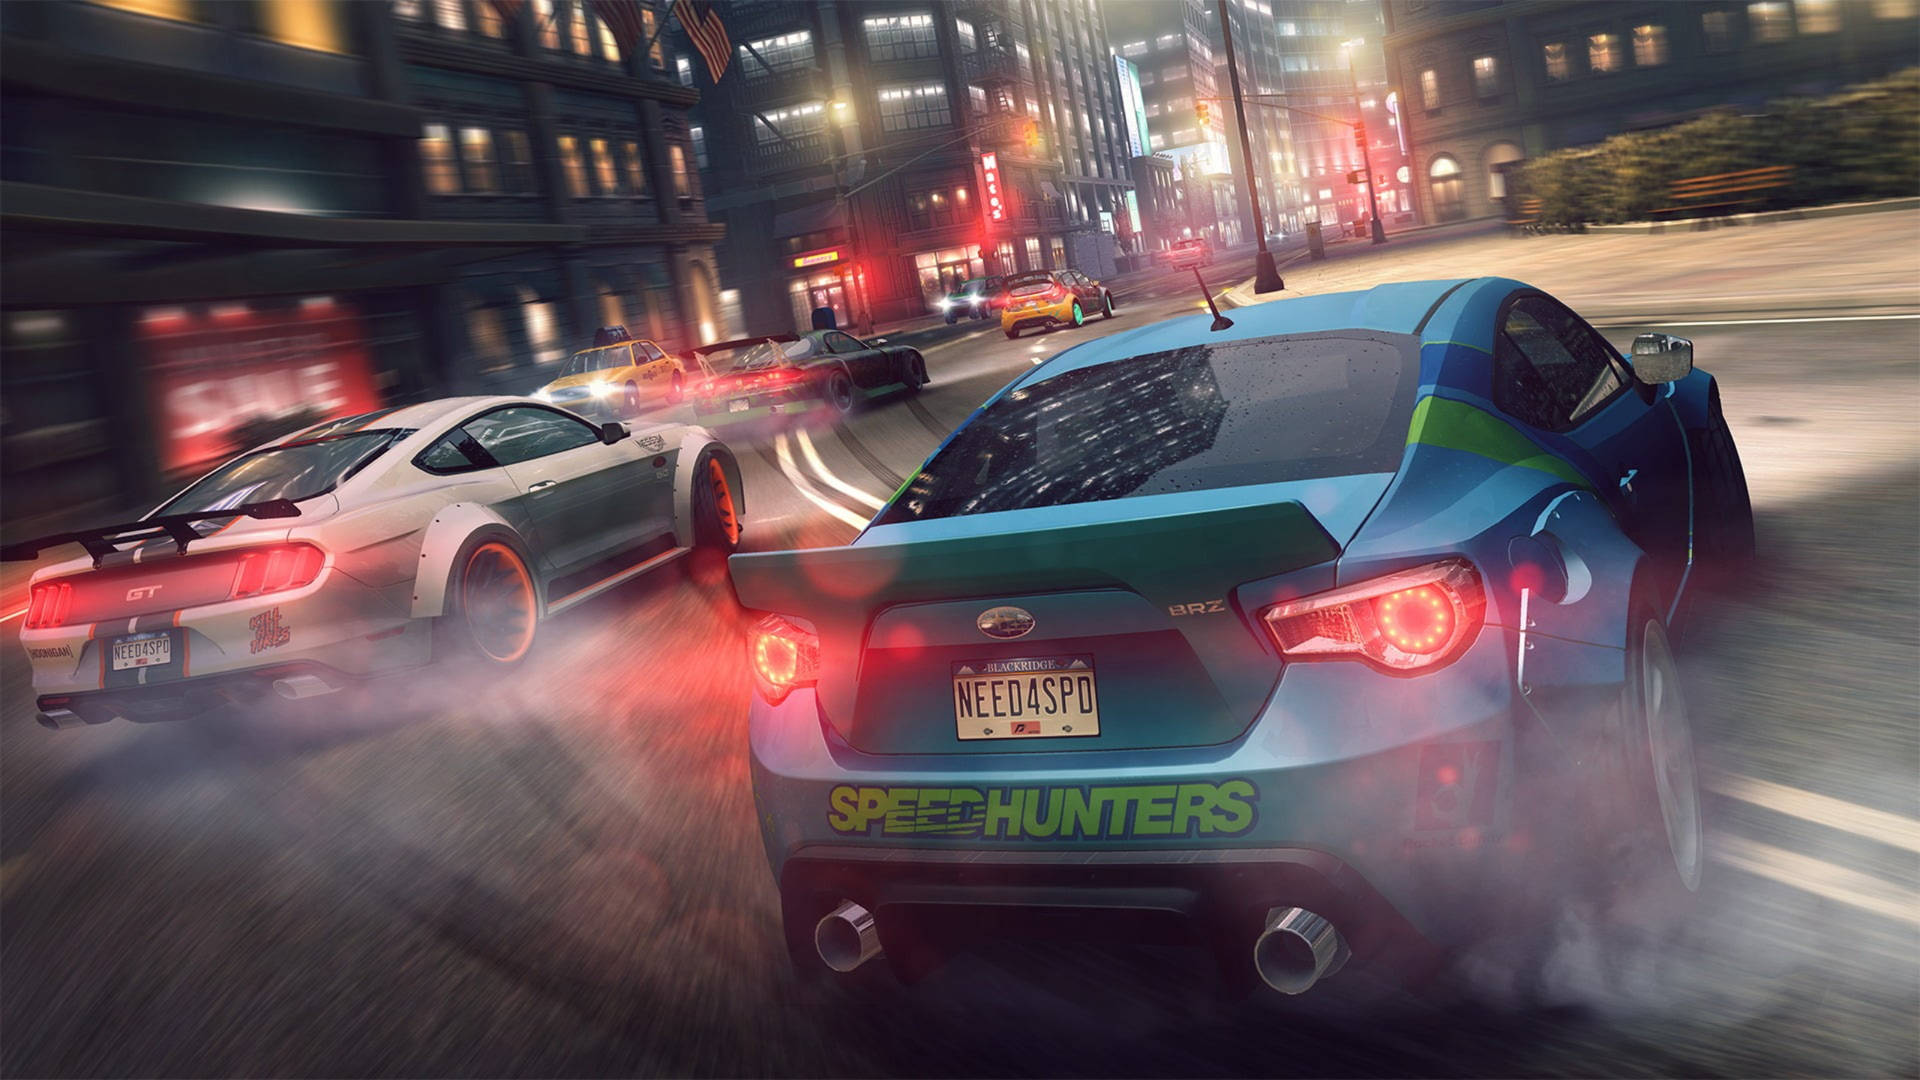 High-speed Thrills - Exhilarating Need for Speed Game Racing Car Wallpaper